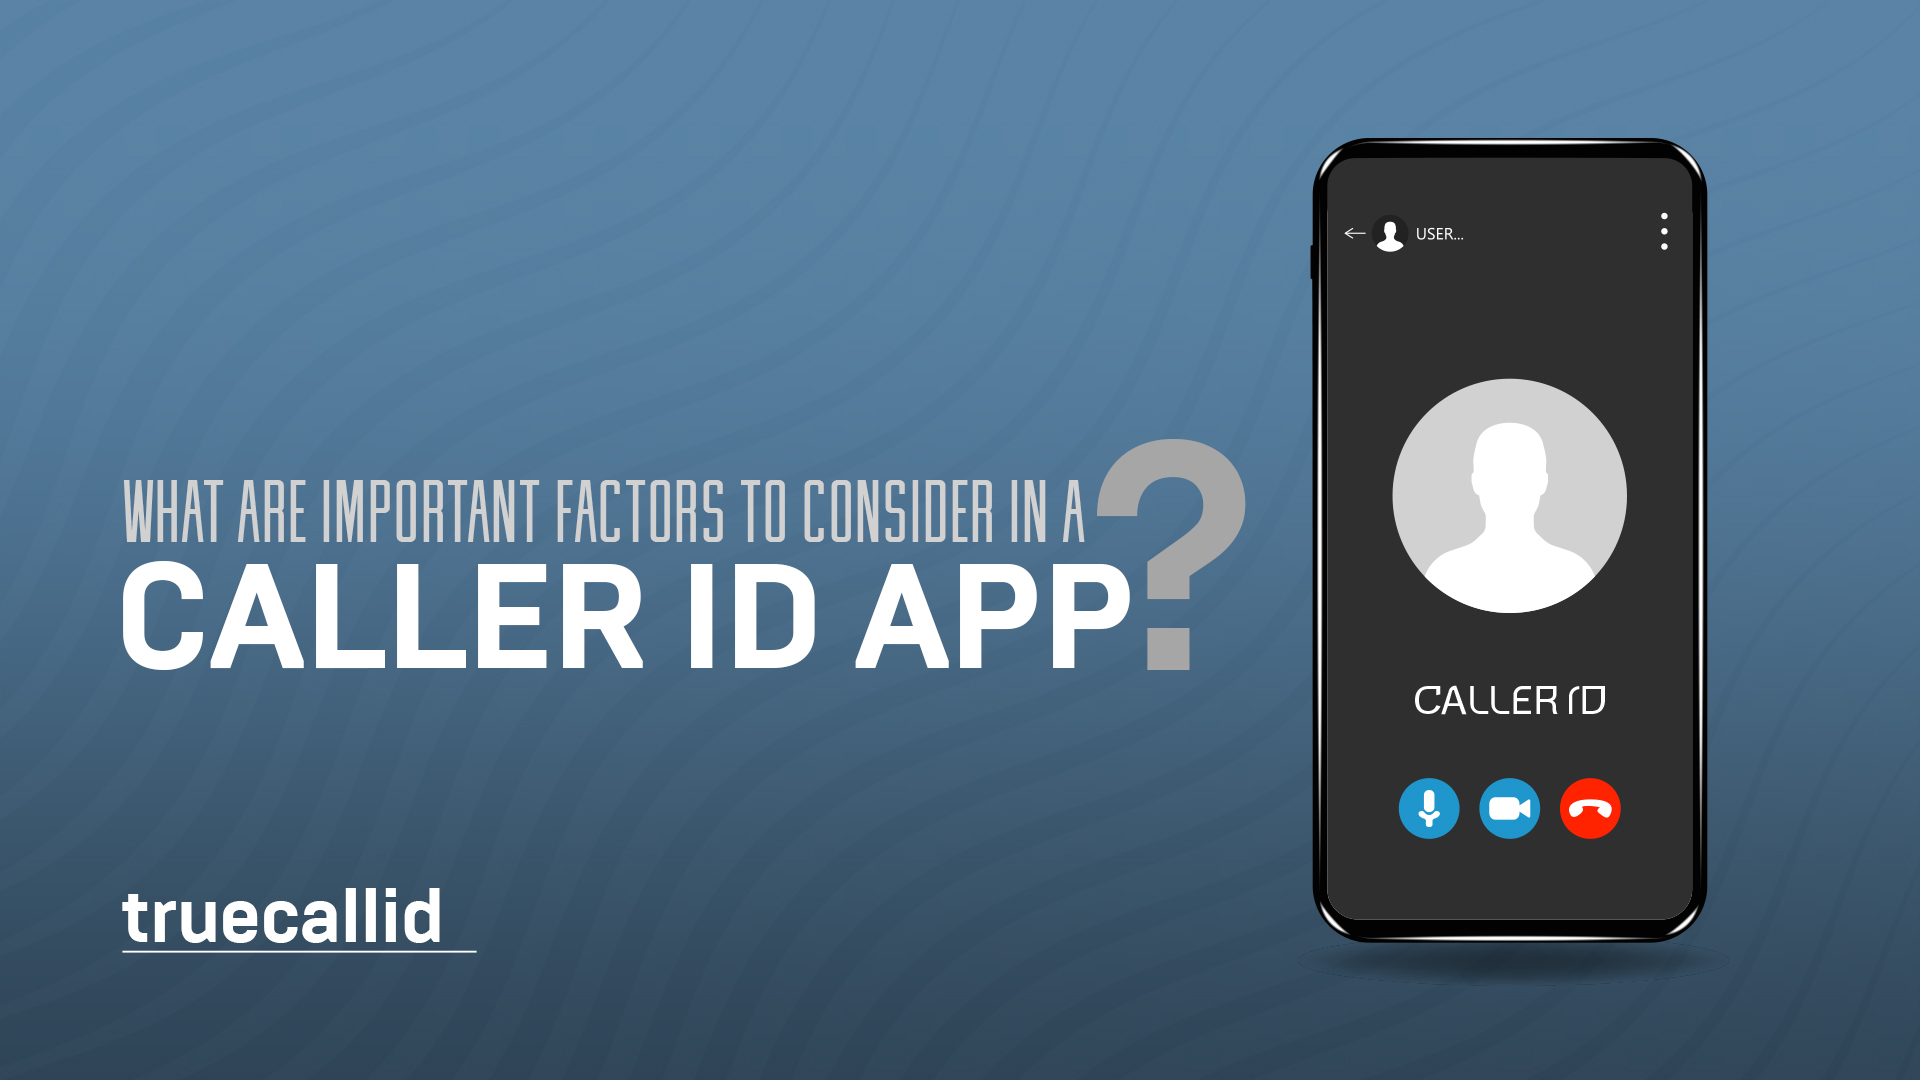 WHAT ARE IMPORTANT FACTORS TO CONSIDER IN A CALLER ID APP?